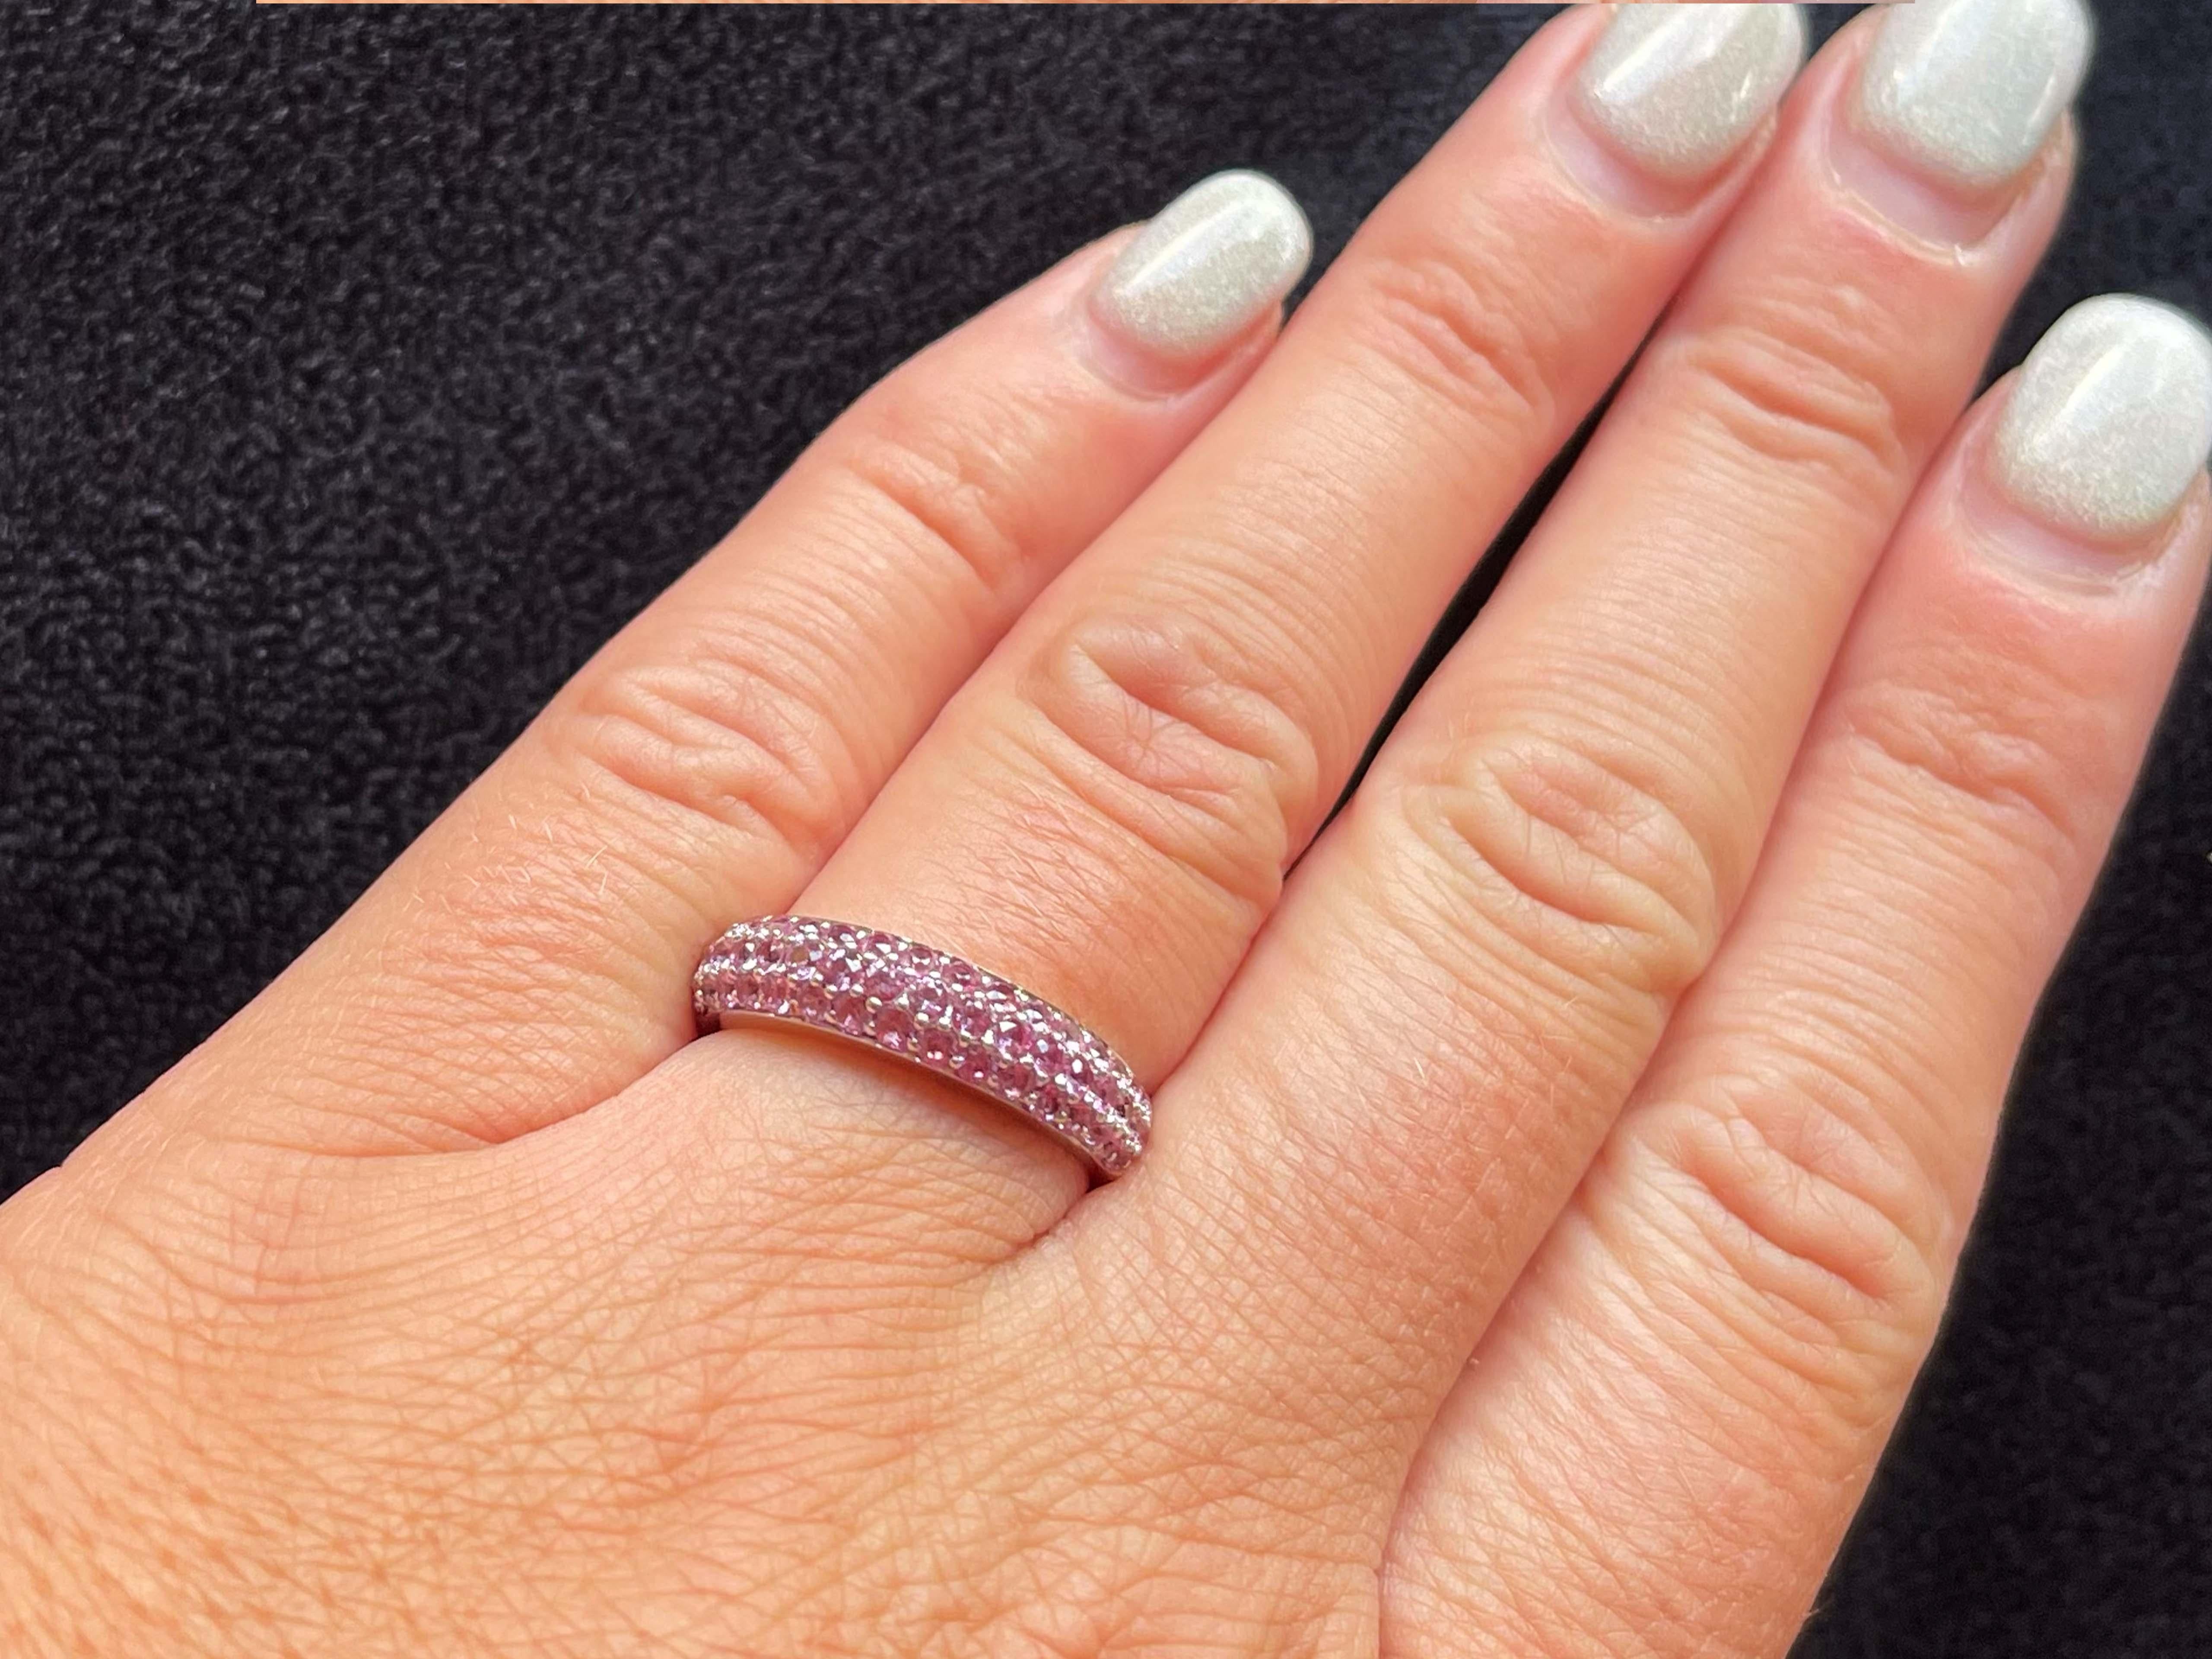 Item Specifications:

Metal: 14K White Gold

Style: Statement Ring

Gemstone Specifications:

Gemstone: 55 pink round Sapphires

Sapphire Carat Weight: 0.65 Carats

Total Weight: 4.0 Grams
​
​Stamped: 